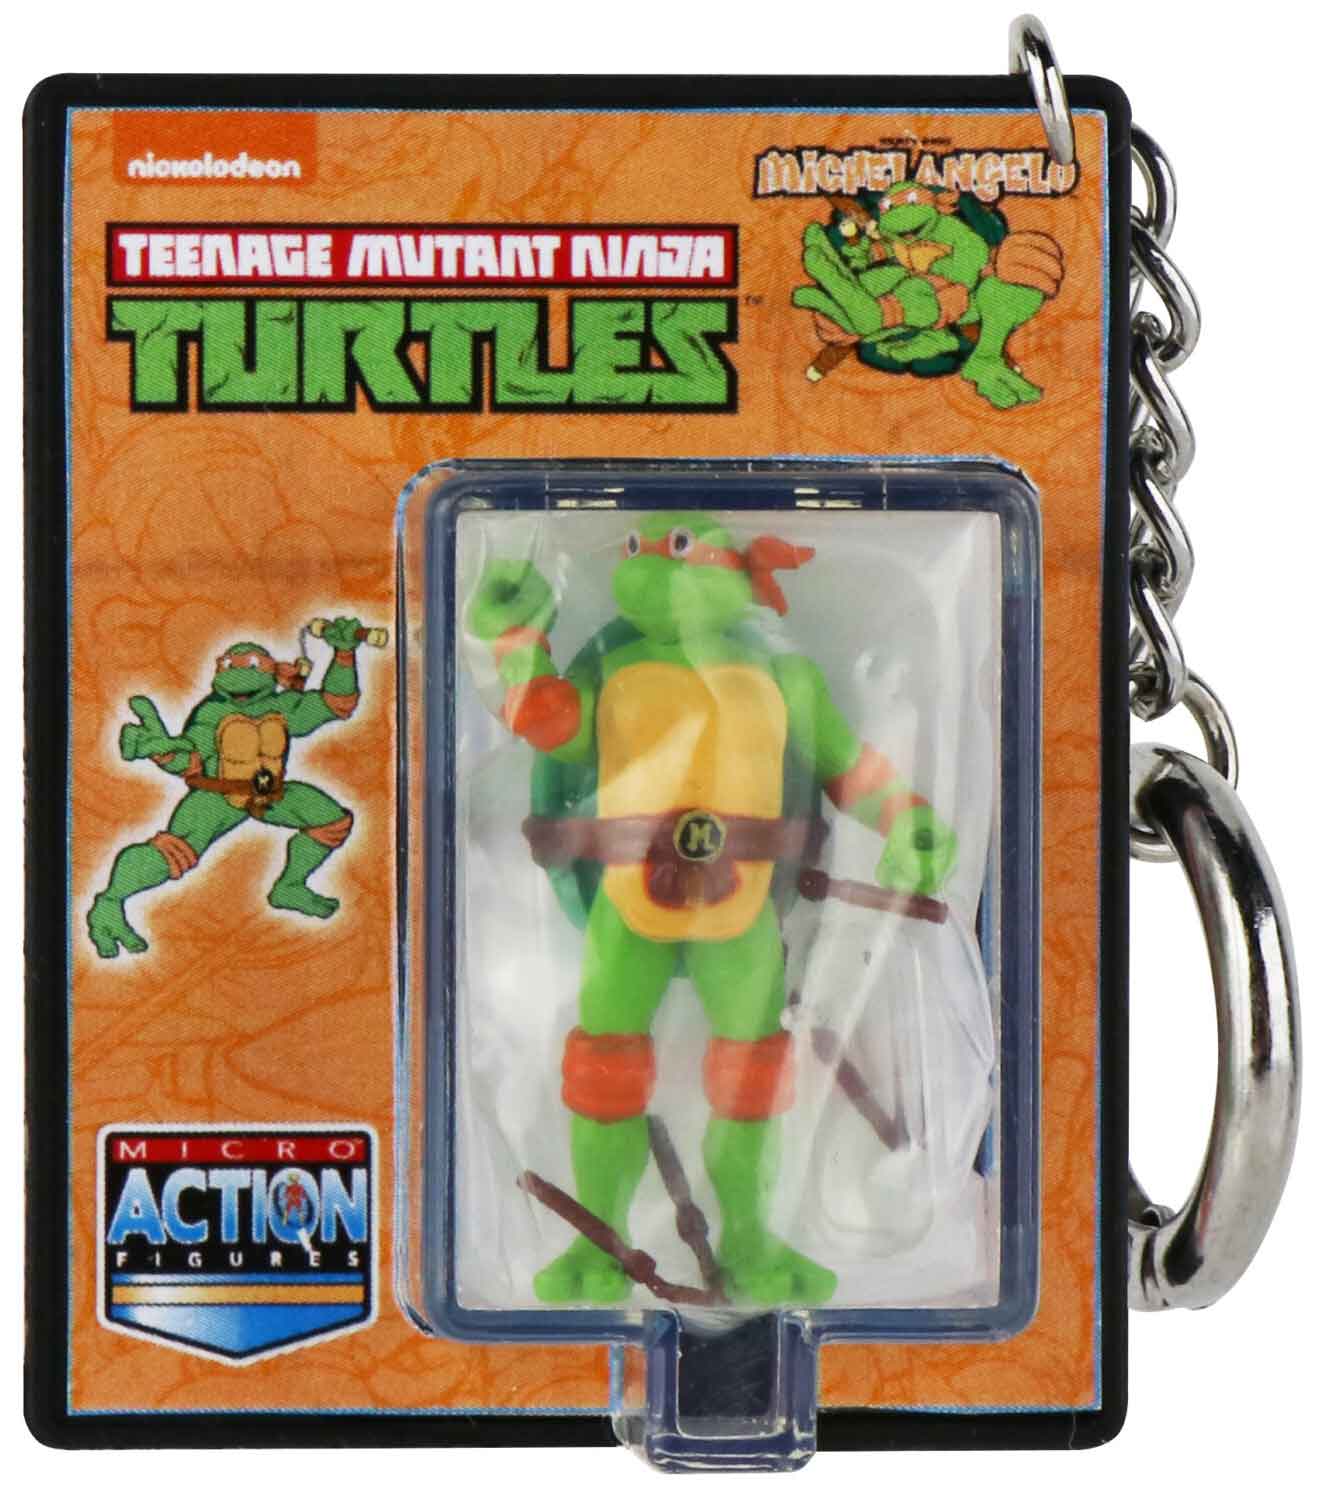 World's Smallest (Coolest) Teenage Mutant Ninja Turtles Michelangelo Micro Figure Gifts Ivy and Pearl Boutique   